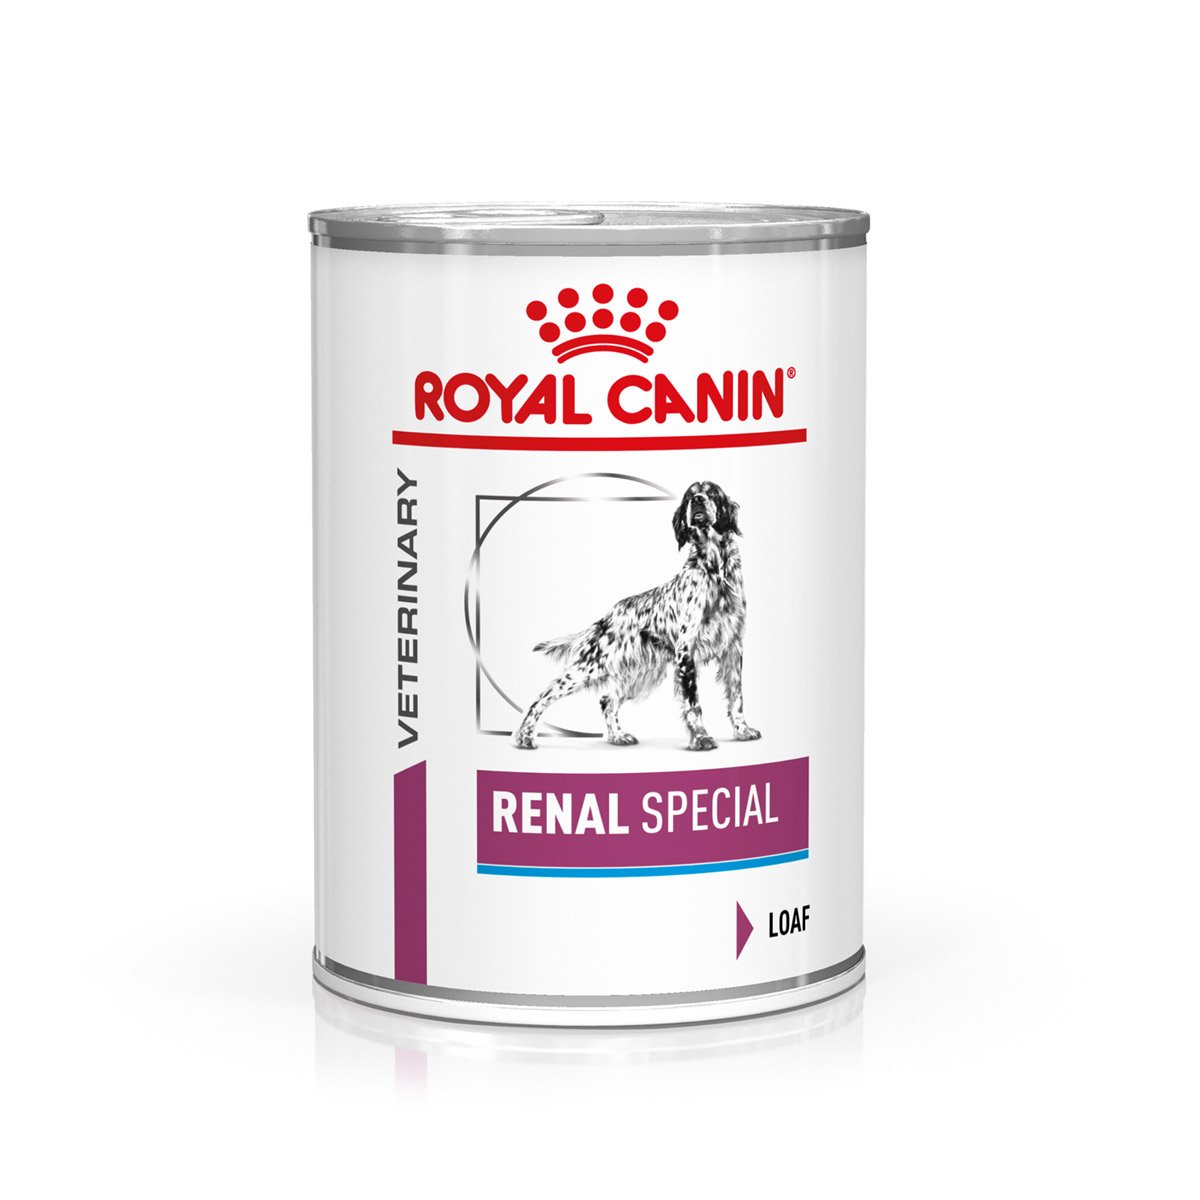 ROYAL CANIN® Veterinary RENAL SPECIAL Nassfutter für Hunde 12x410g von Royal Canin